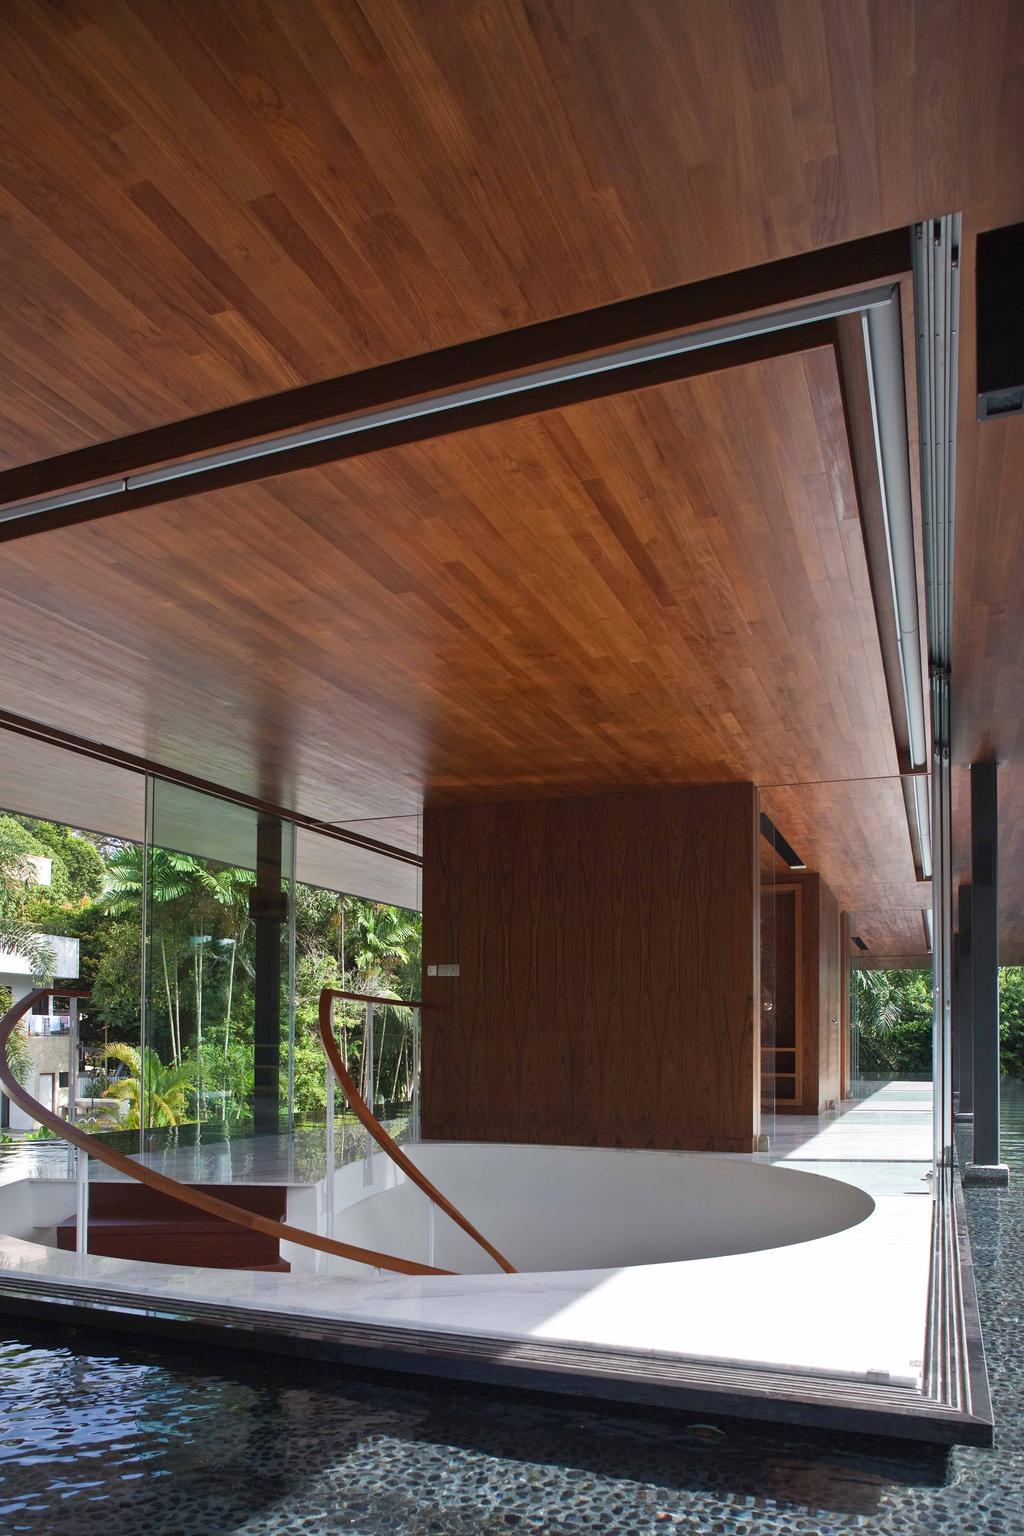 Contemporary, Landed, Bukit Timah (Water-Cooled House), Architect, Wallflower Architecture + Design, Wooden Ceiling, Water Surrounded Platform, Floating Platform, Wooden Partitions, Stairway, Hardwood, Wood